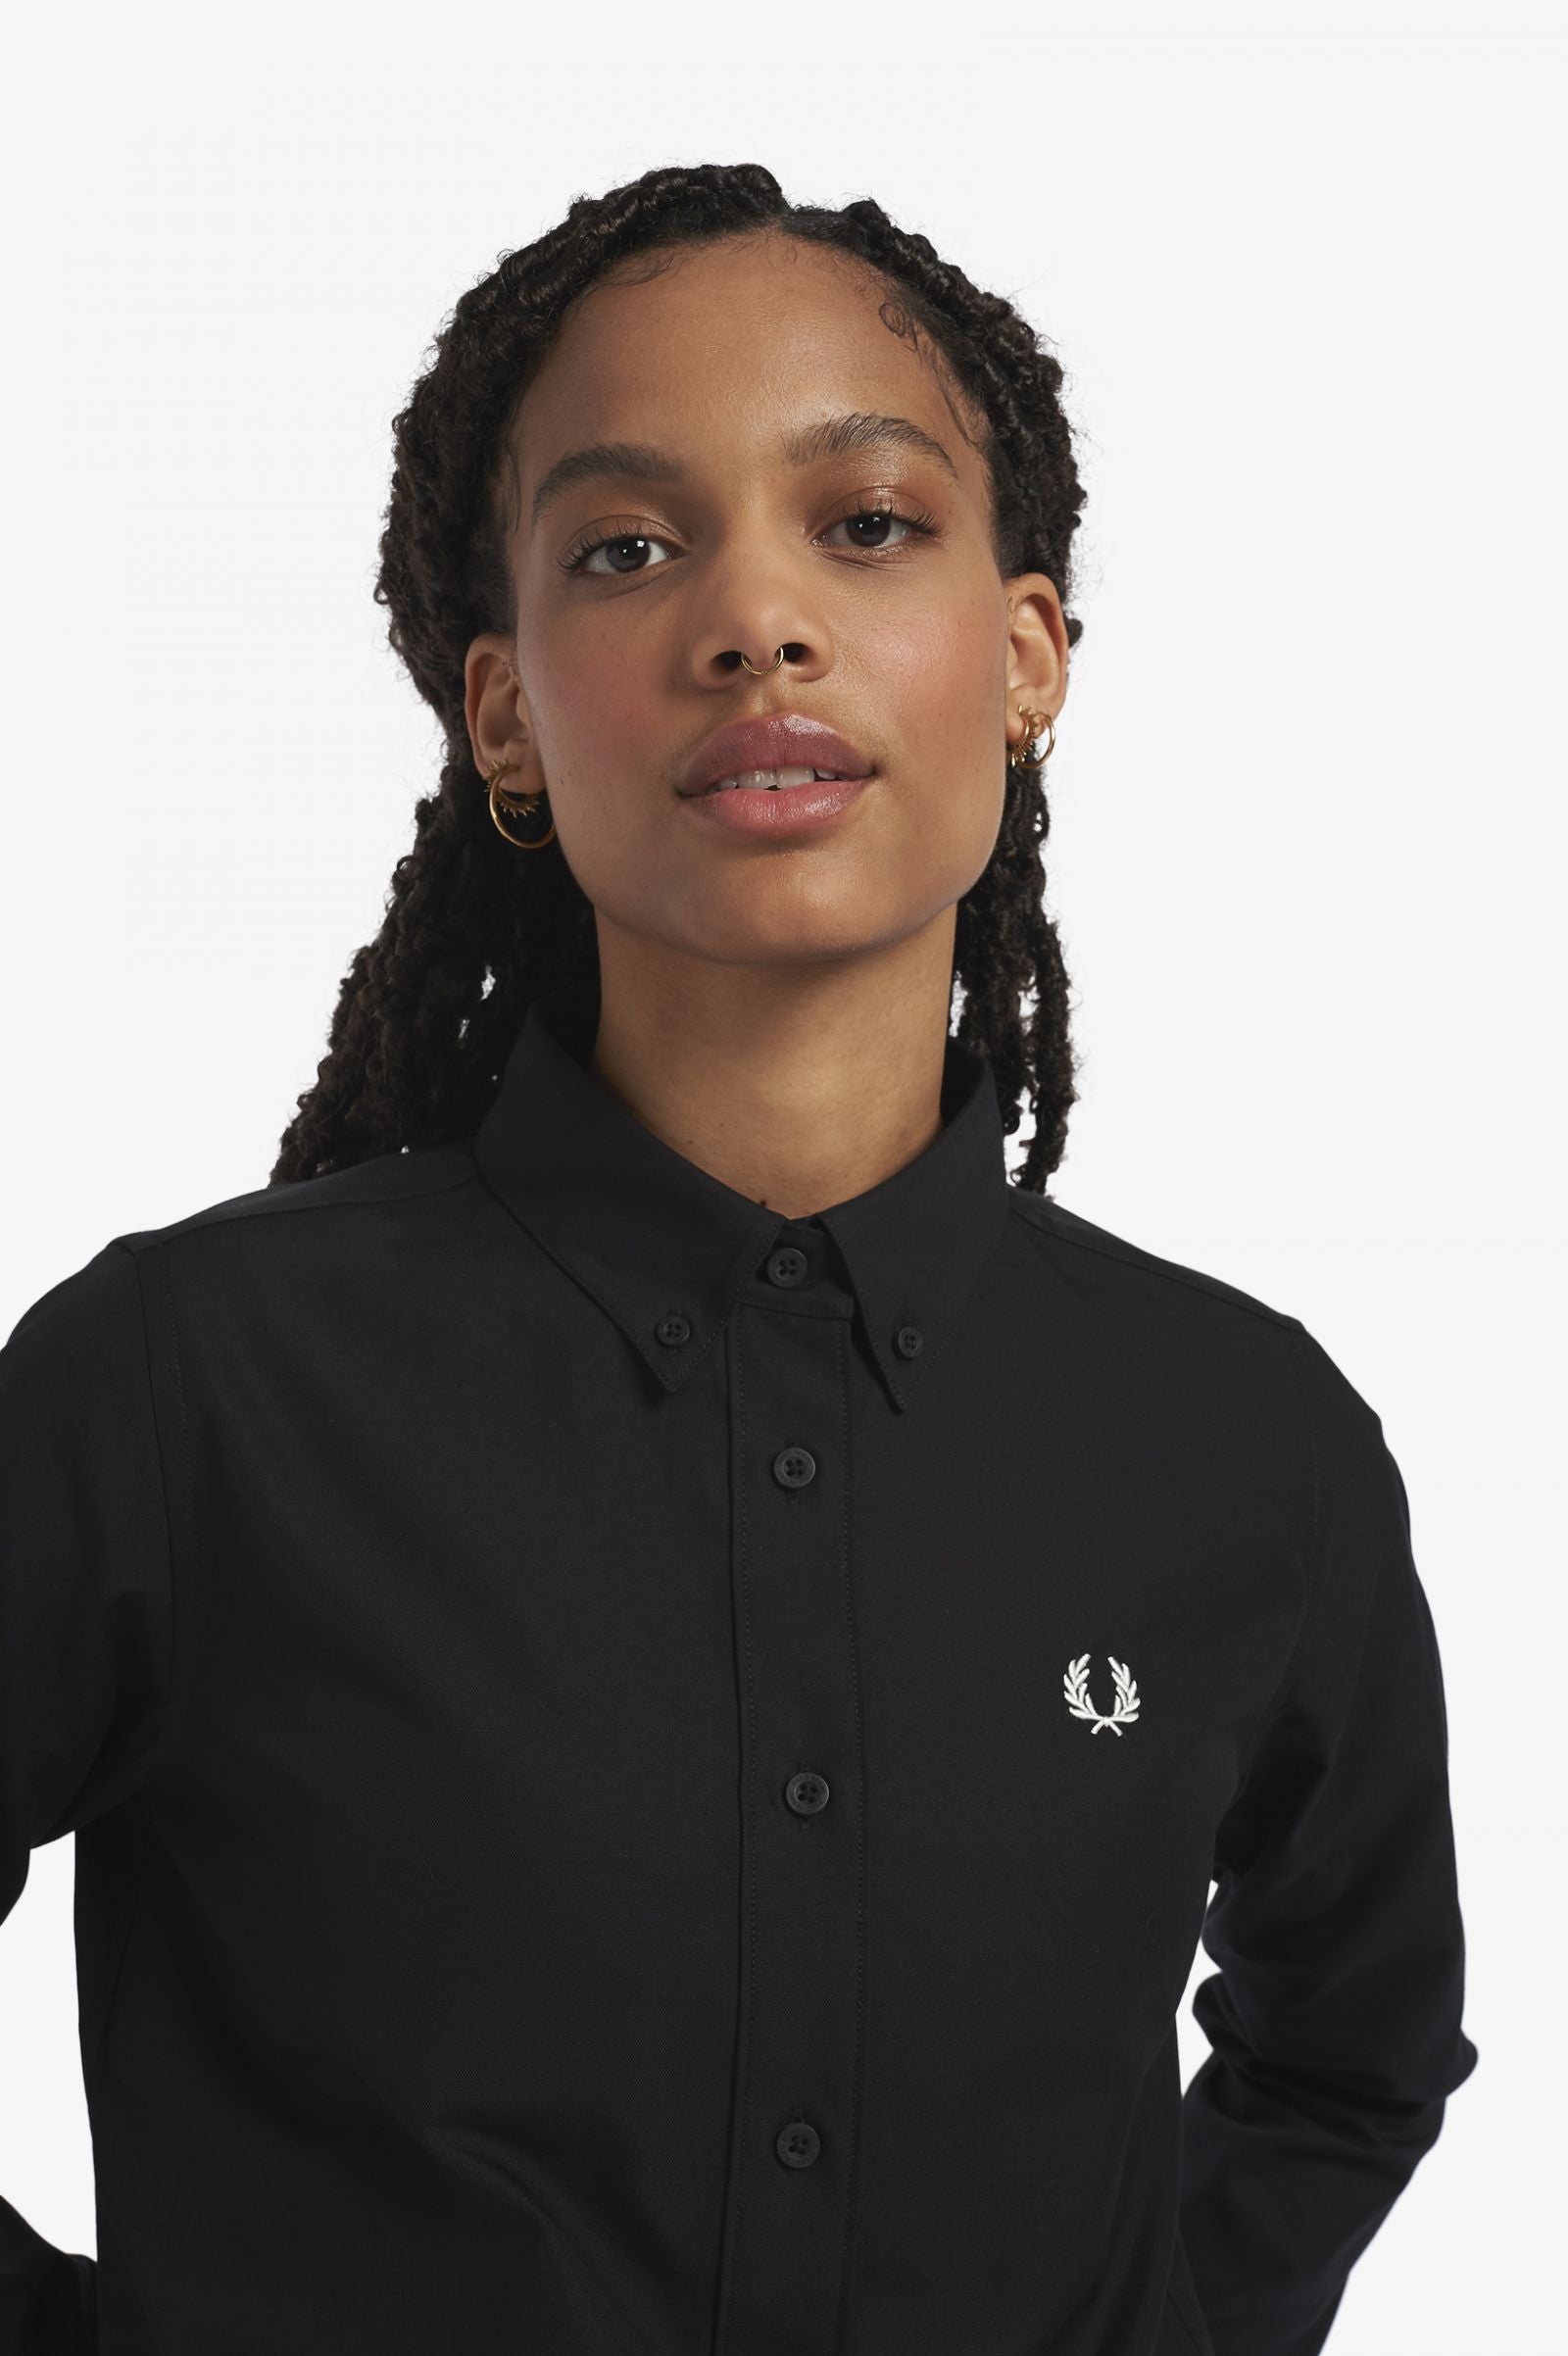 Fred Perry Button-Down Shirt - Black